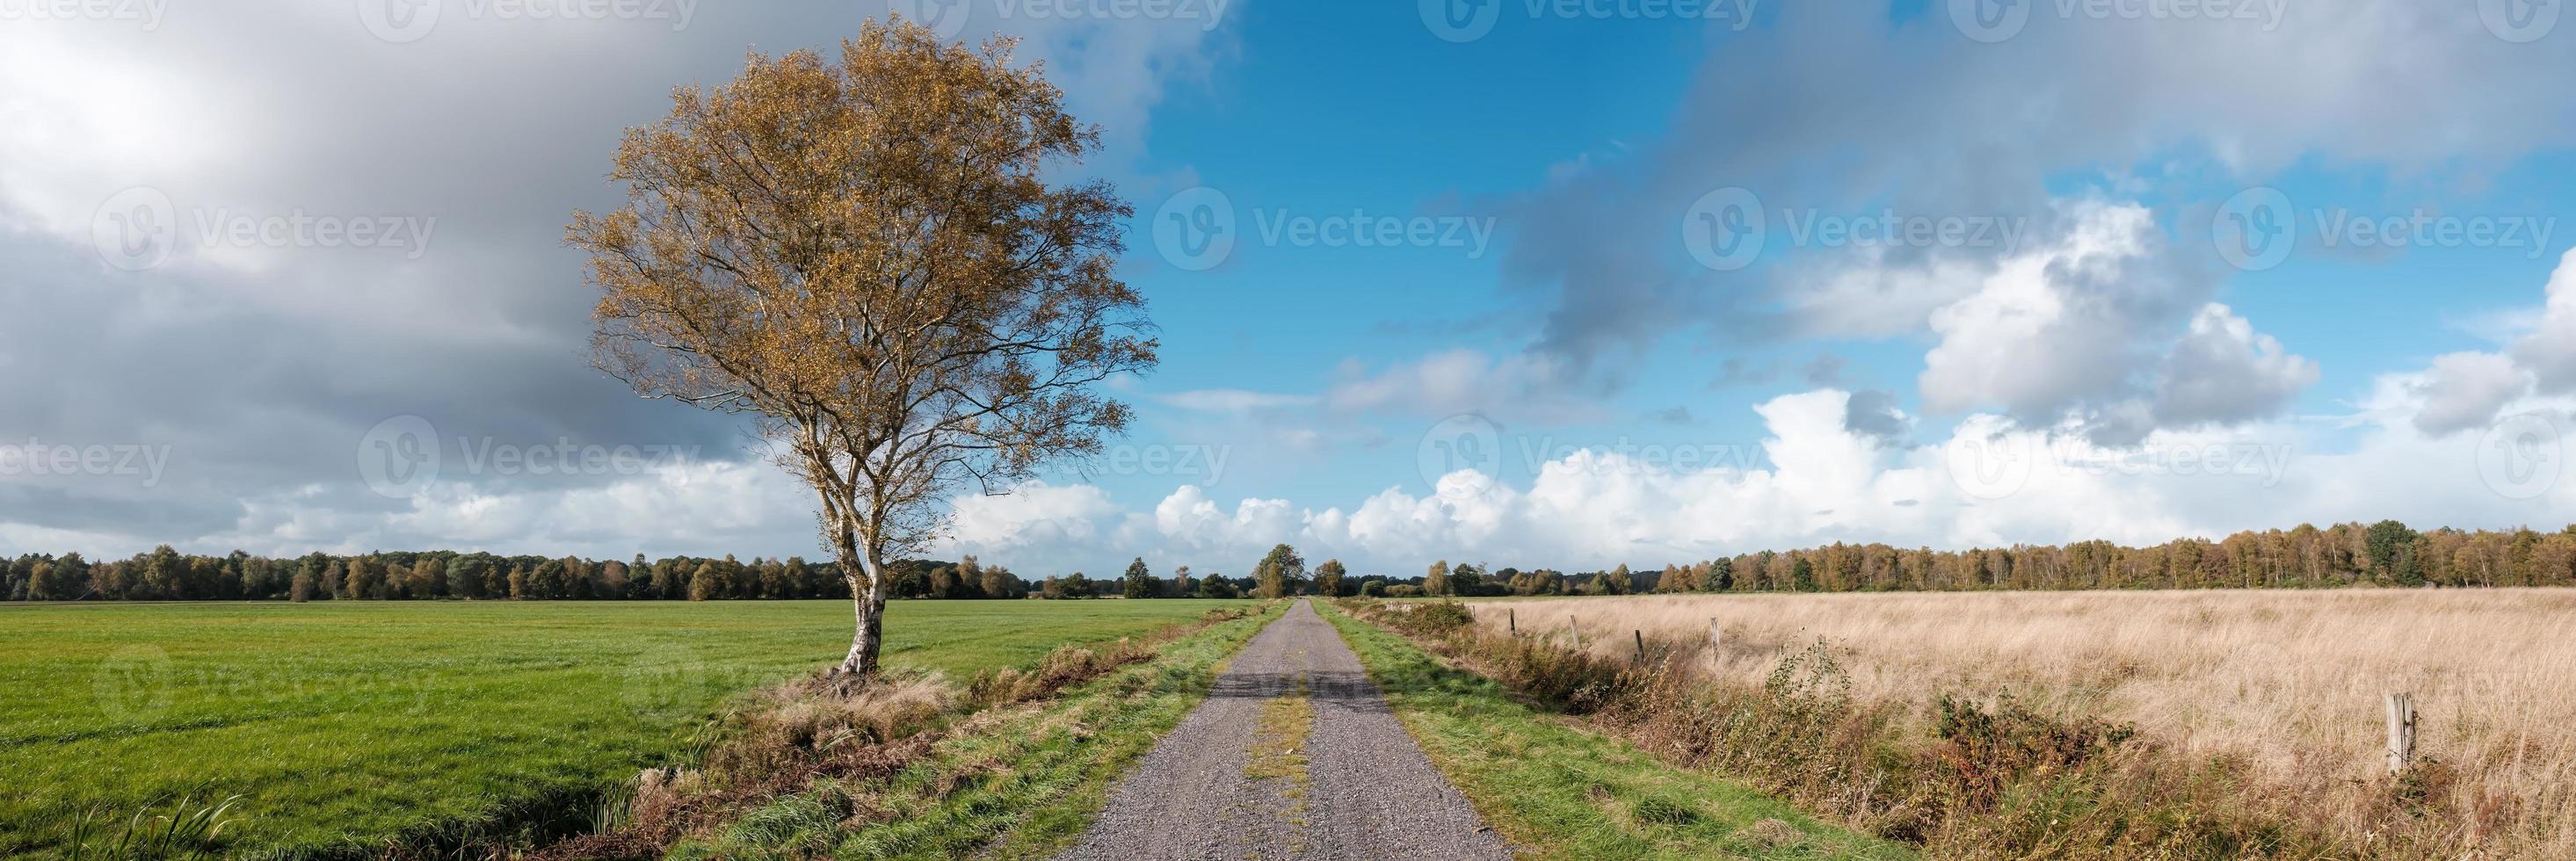 Panorama. Beautiful agricultural autumn landscape. Rural road, tree with yellowed leaves and fields, against the sky, on a sunny day. photo